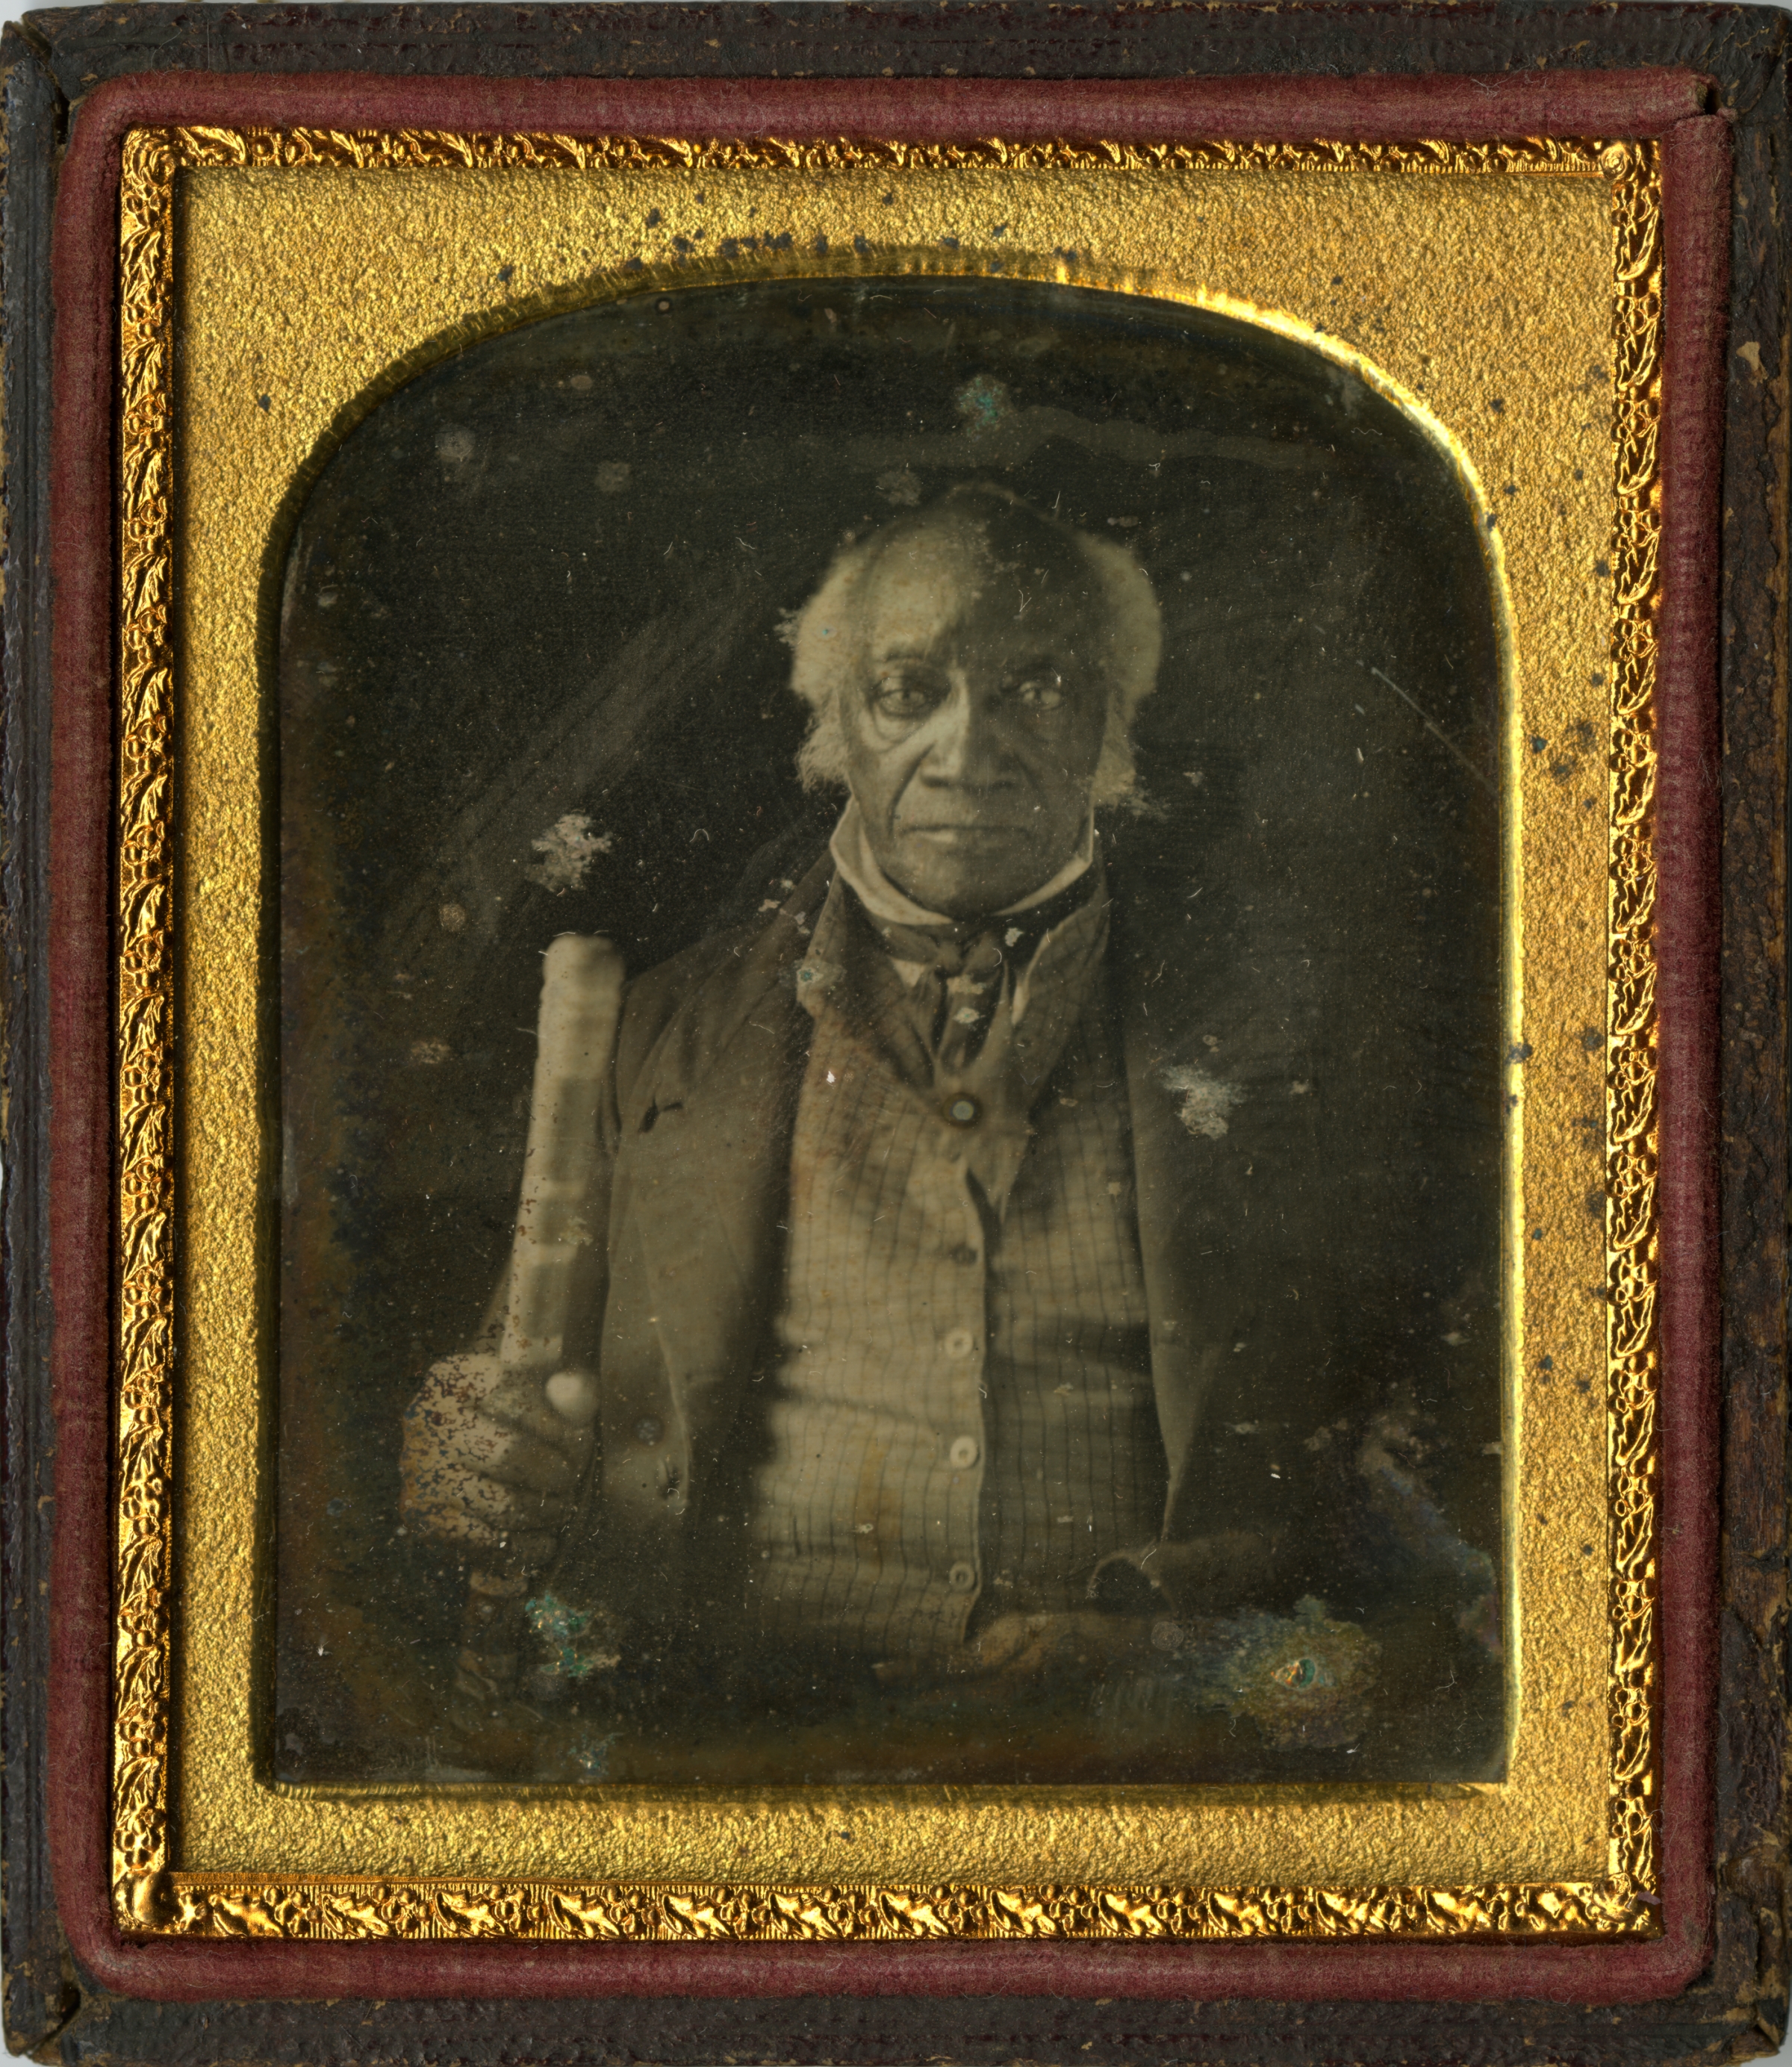 Daguerreotype of Caesar, ca. 1850, believed to have been the very last enslaved person manumitted in New York State (New-York Historical Society)